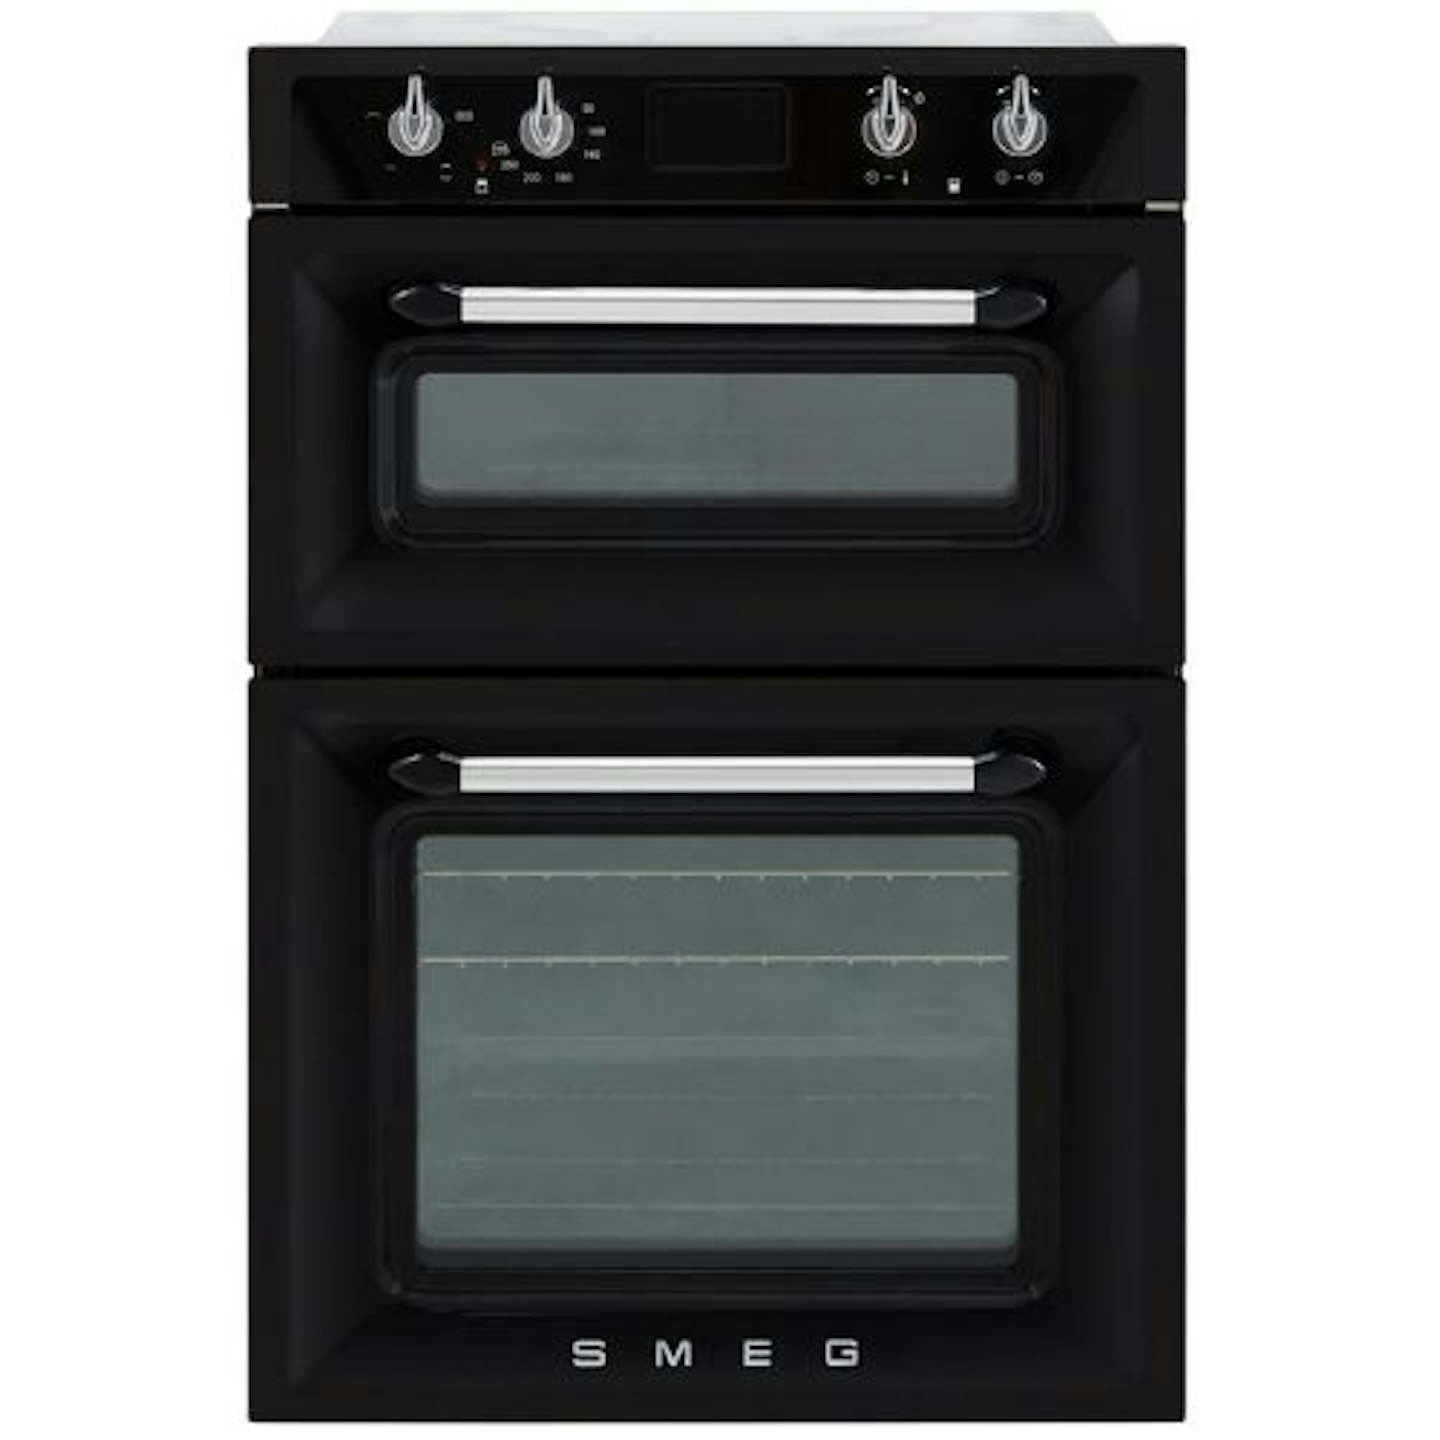 Smeg Victoria DOSF6920N1 Built In Electric Double Oven